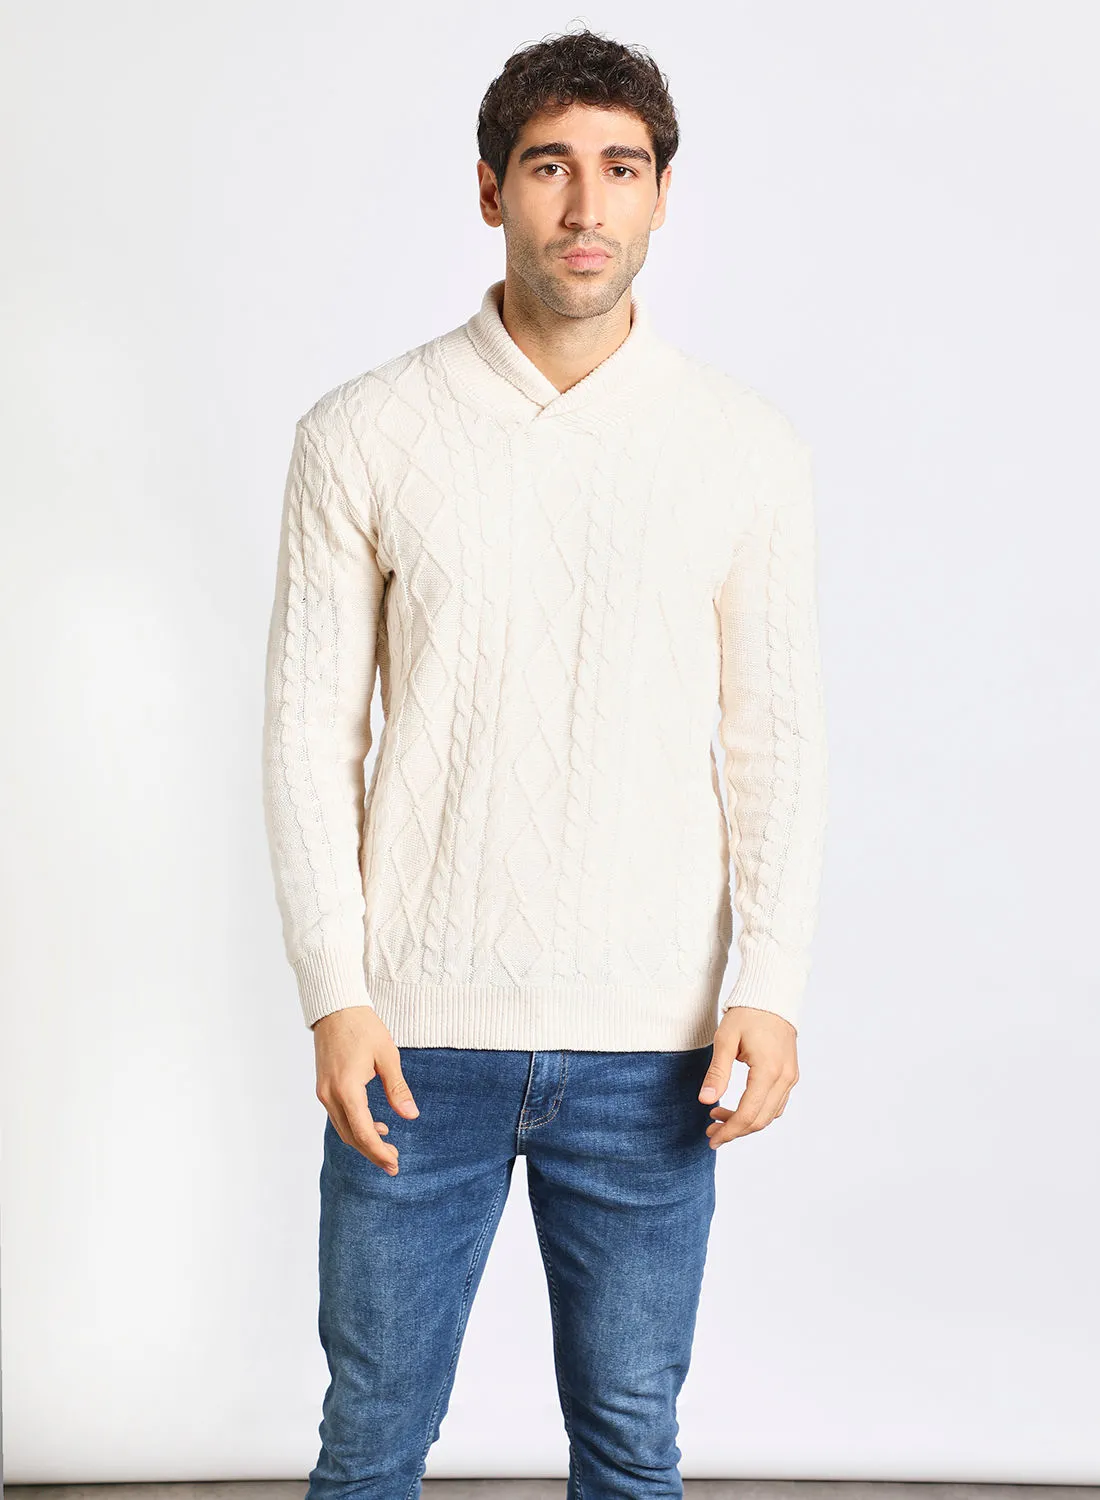 Noon East Men's Solid Plain Knitted Patterned Full Sleeves Sweater For Winters , Round Neck Full Sleeves Beige